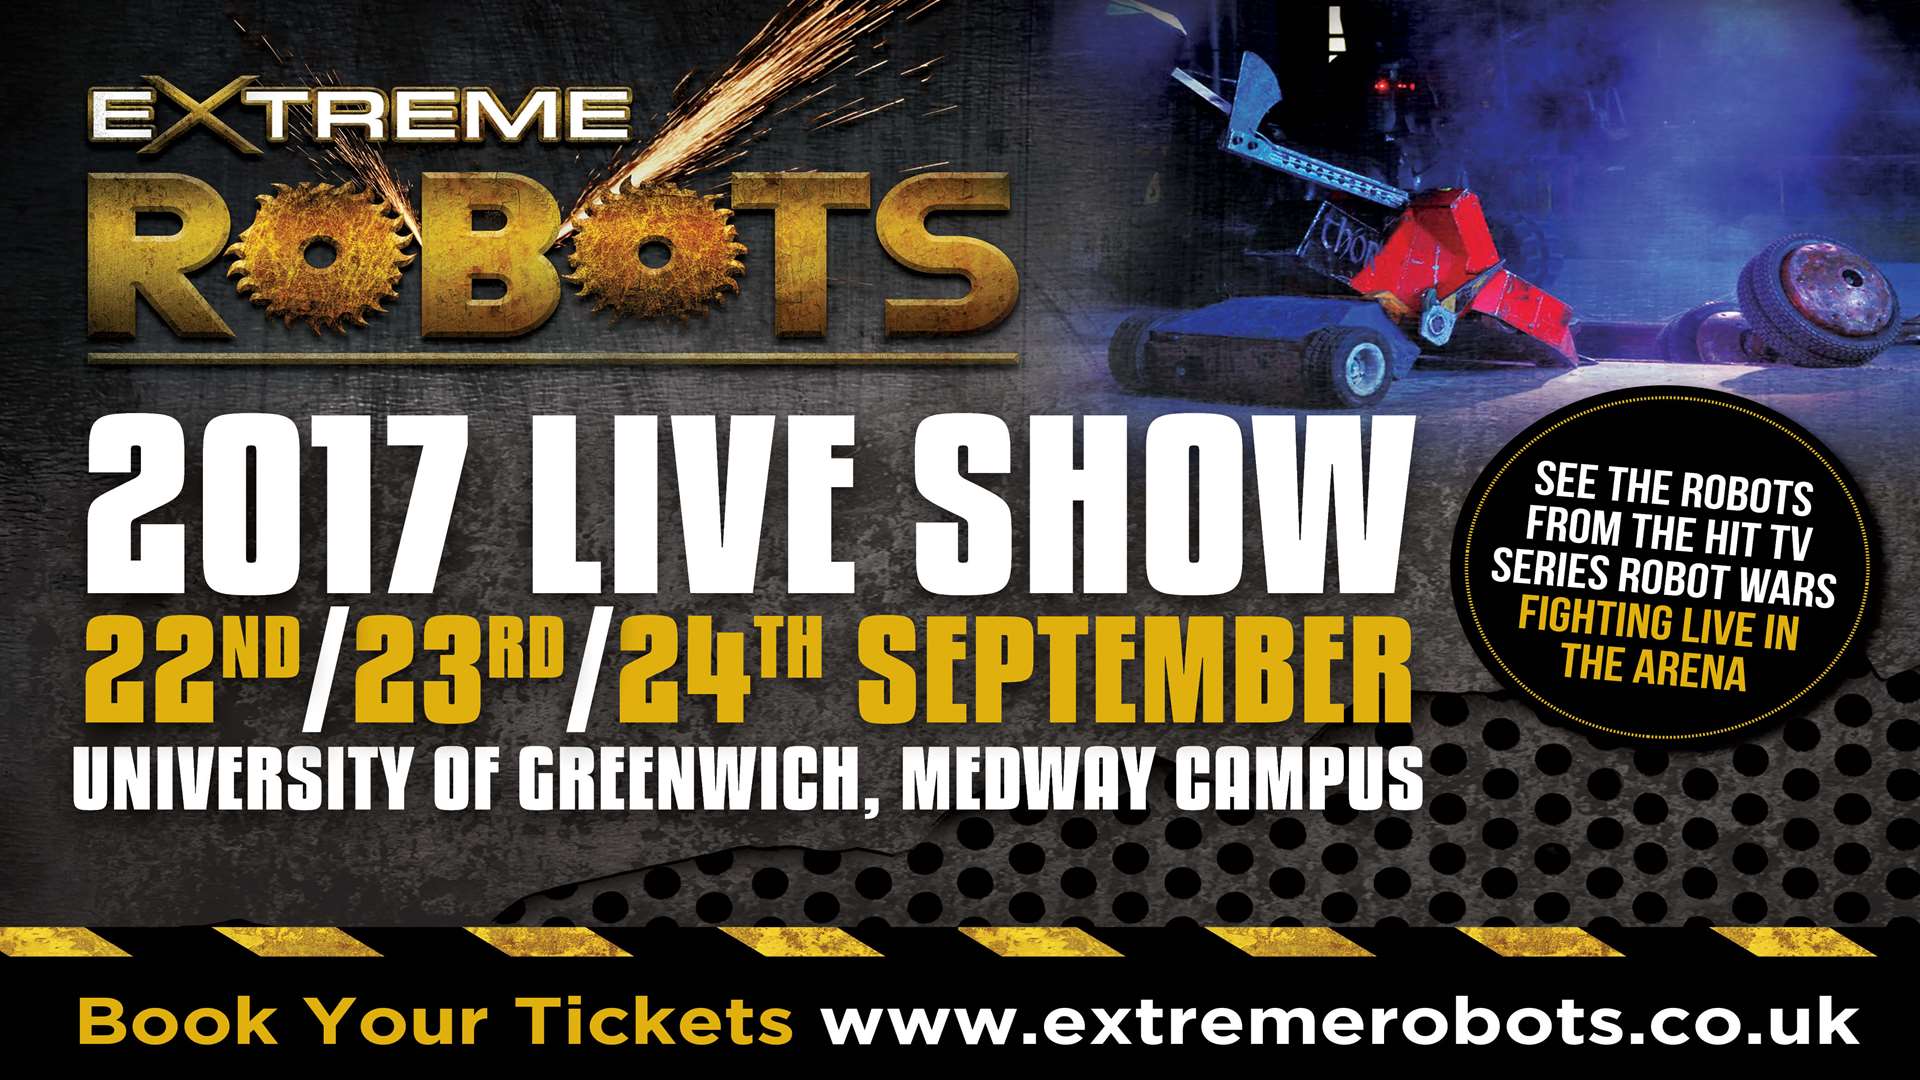 Win a family ticket to Extreme Robots